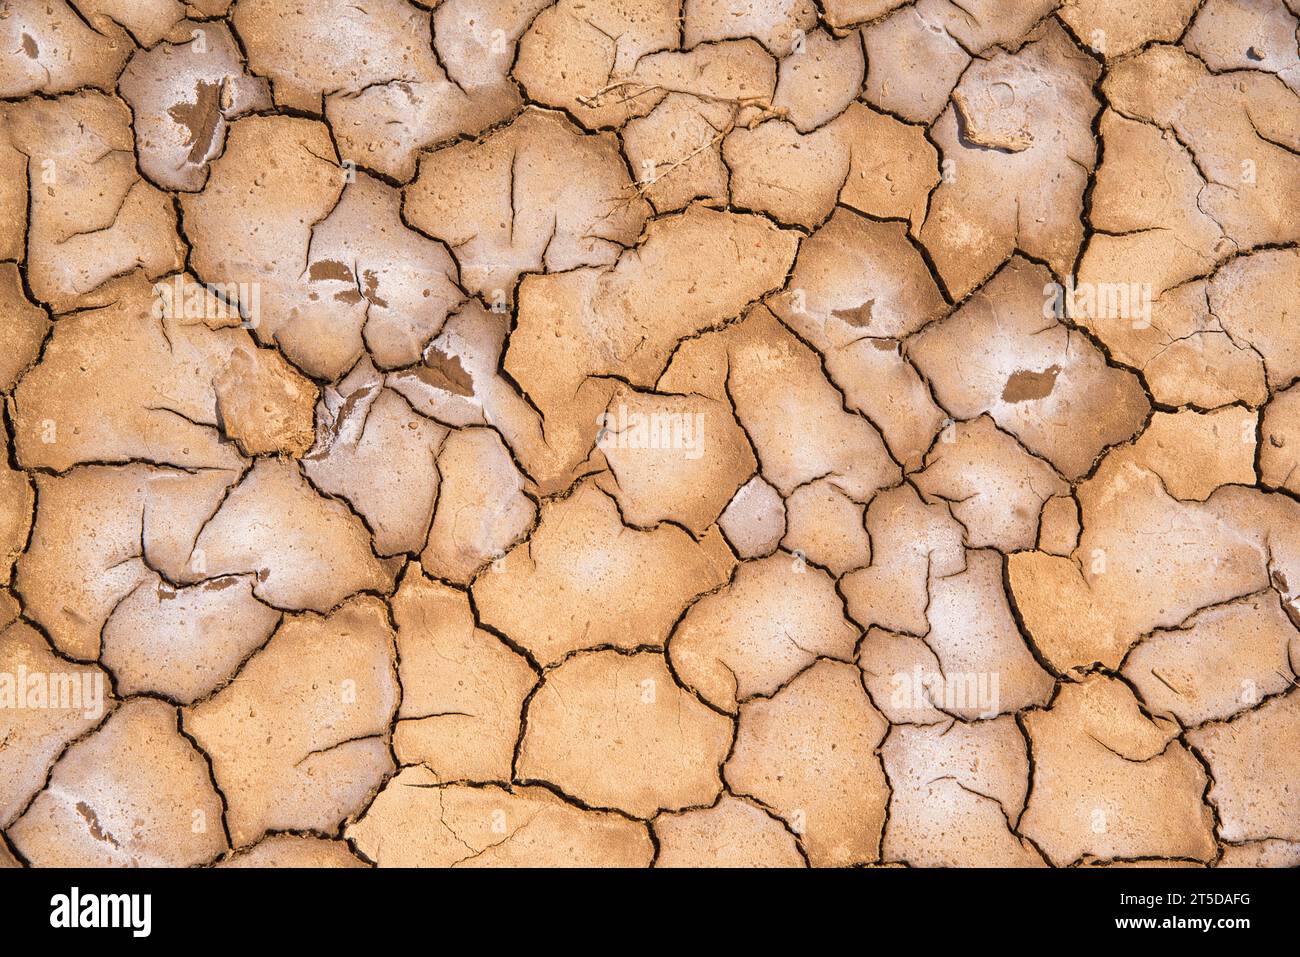 Dry cracked earth drought dry earth dry soil arid clay soil with cracks-Terre sèche et fissurée terre sèche terre sèche sol aride Stock Photo